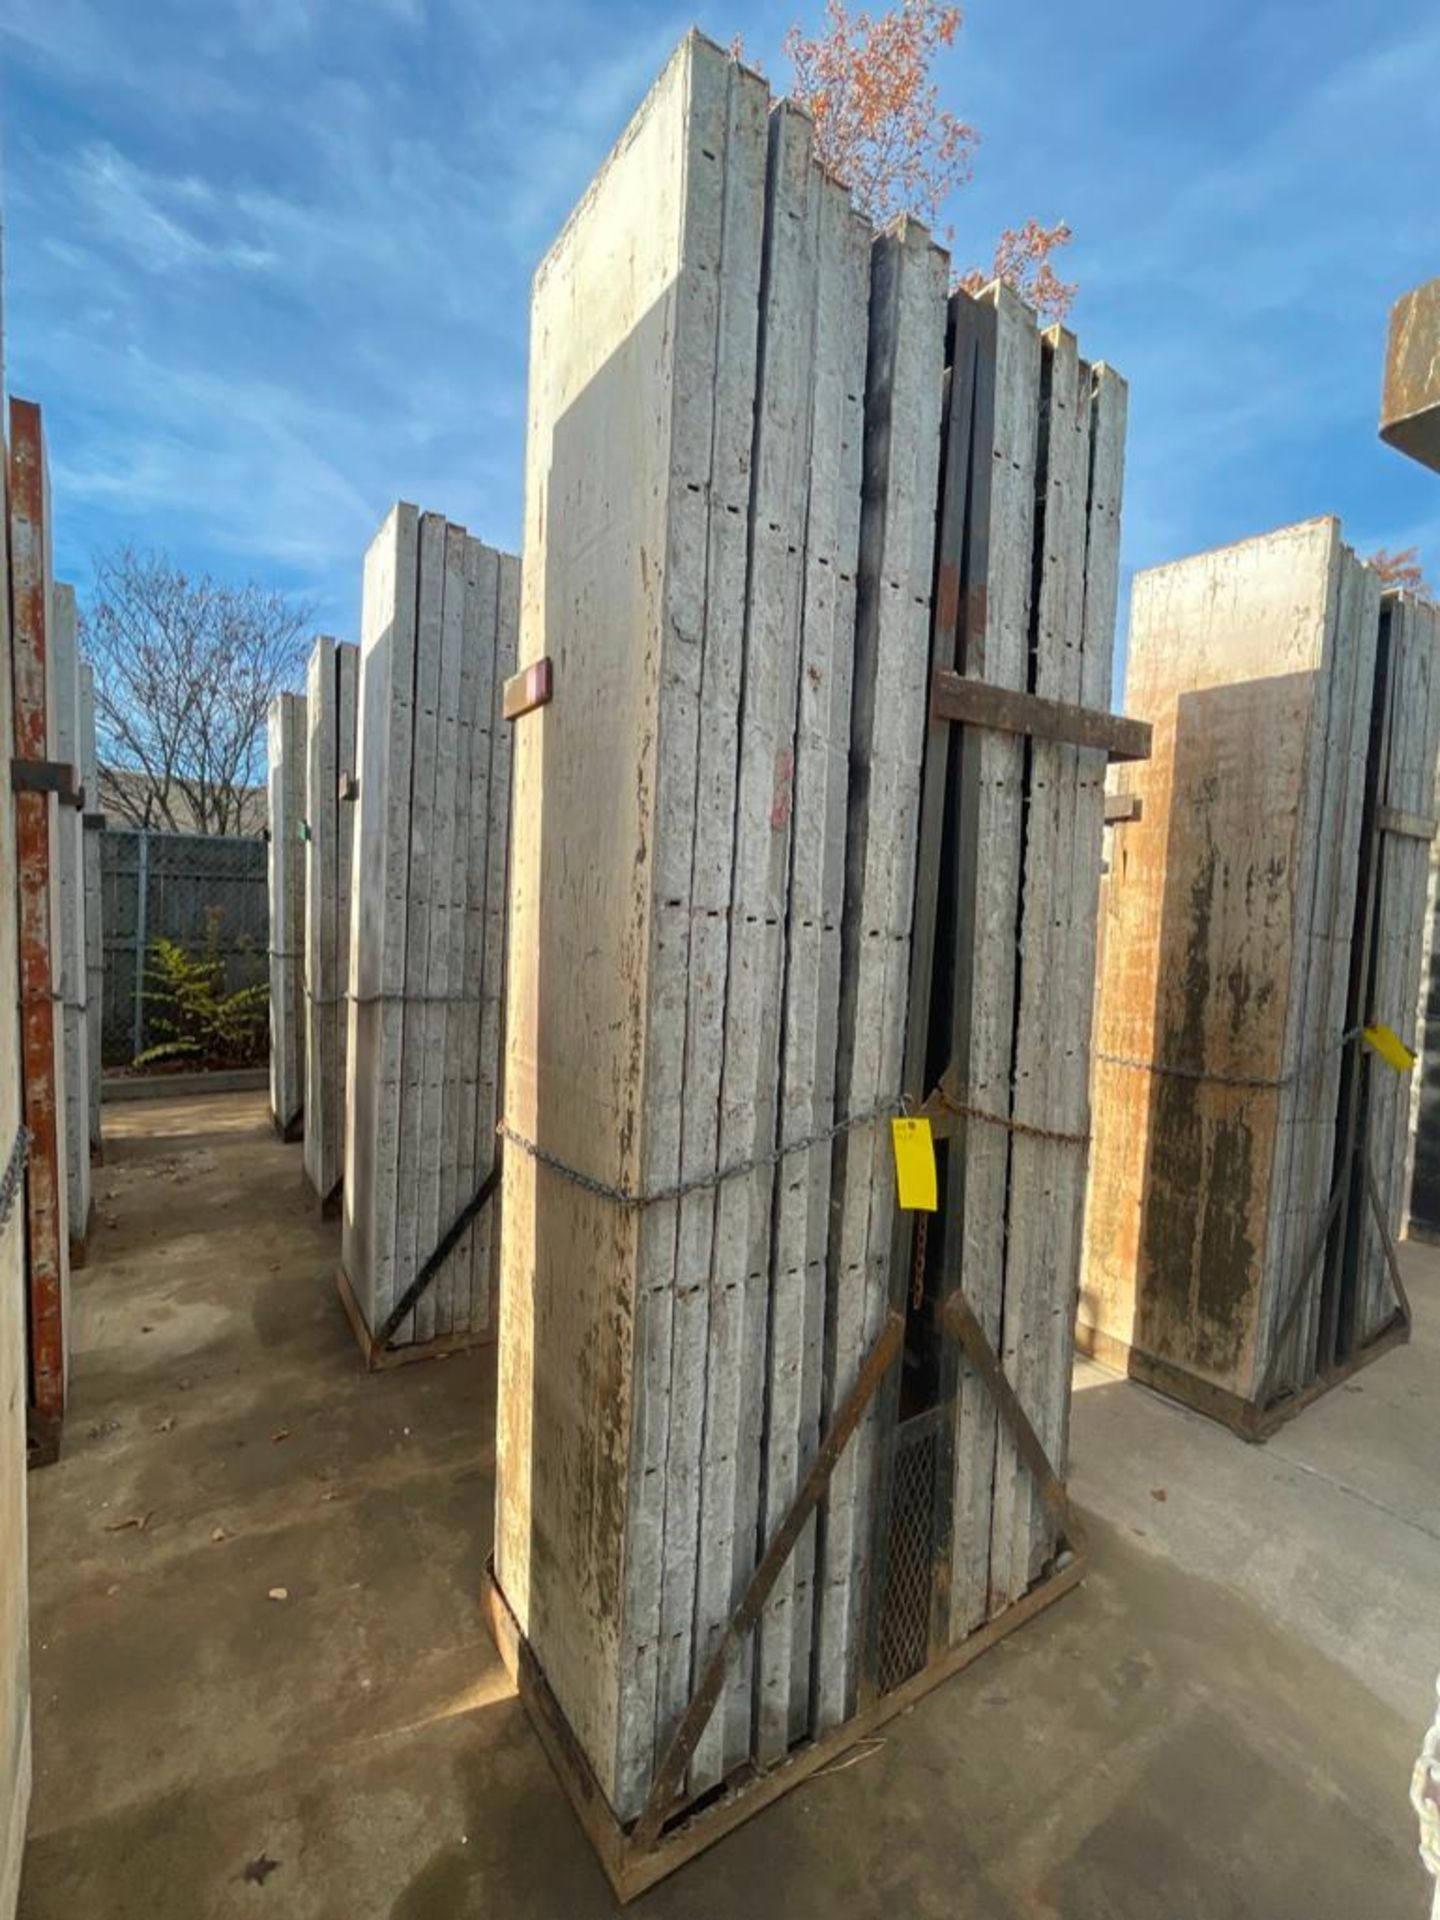 (16) 2' x 9' Symons Steel Ply Concrete Forms in Baskets with Bells. Located in Hazelwood. MO